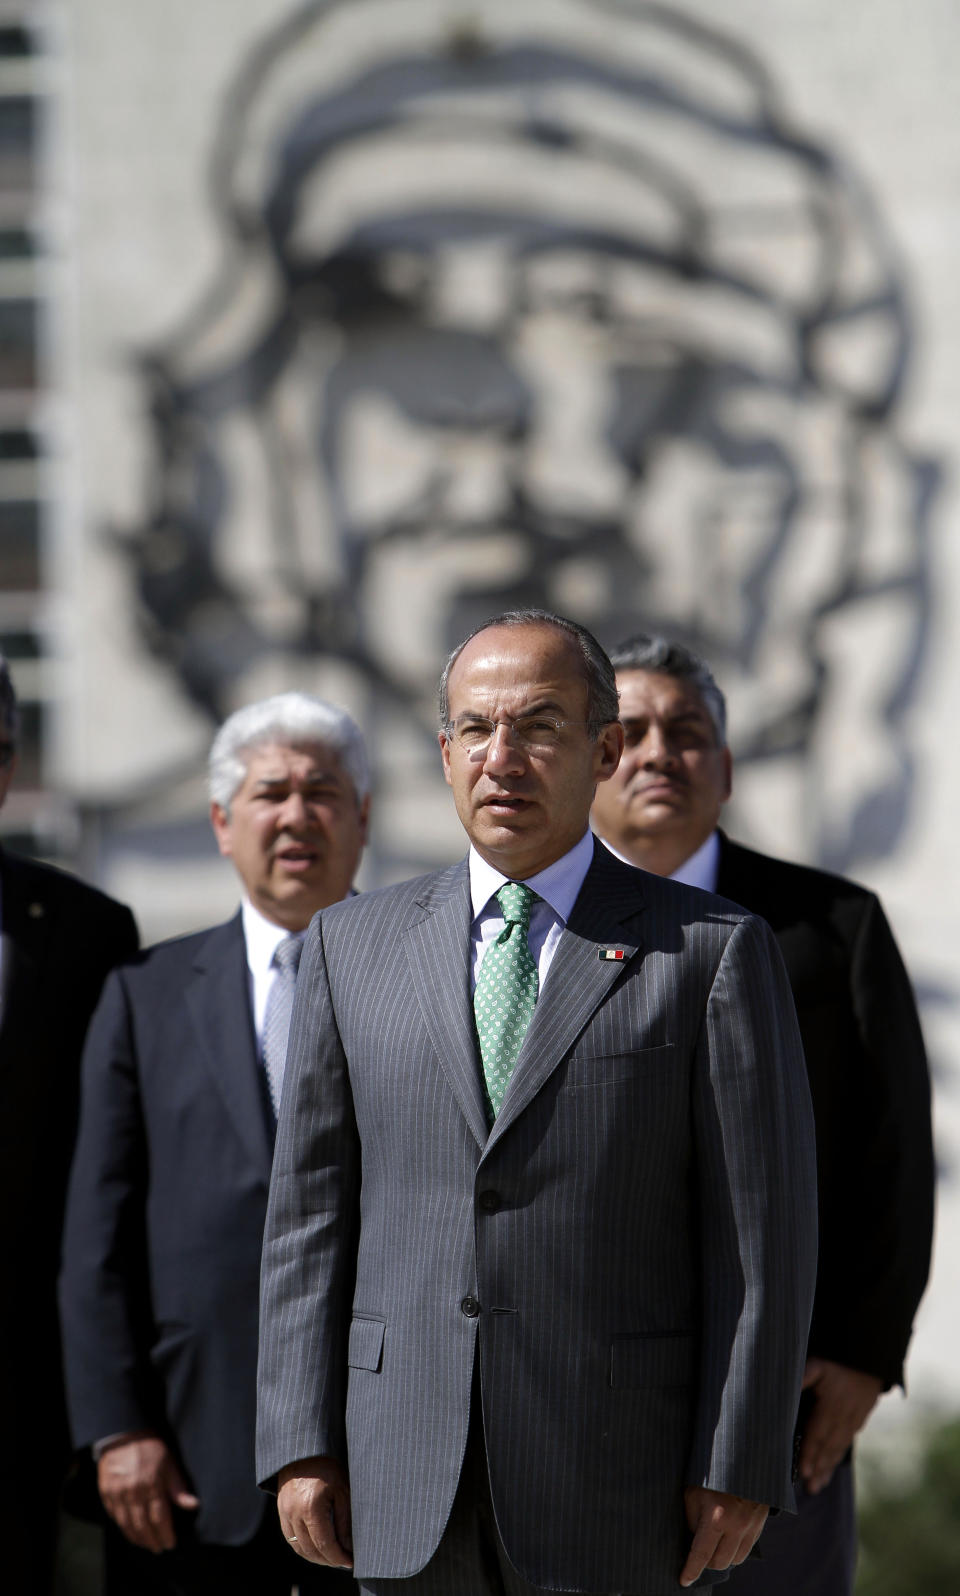 Mexico's President Felipe Calderon, front, attends a wreath-laying ceremony at the Jose Marti monument in Havana, Cuba, Wednesday, April 11, 2012. Calderon is on a two-day official visit to Cuba. In background, an image of Cuba's revolutionary hero Ernesto "Che" Guevara. (AP Photo/Franklin Reyes)